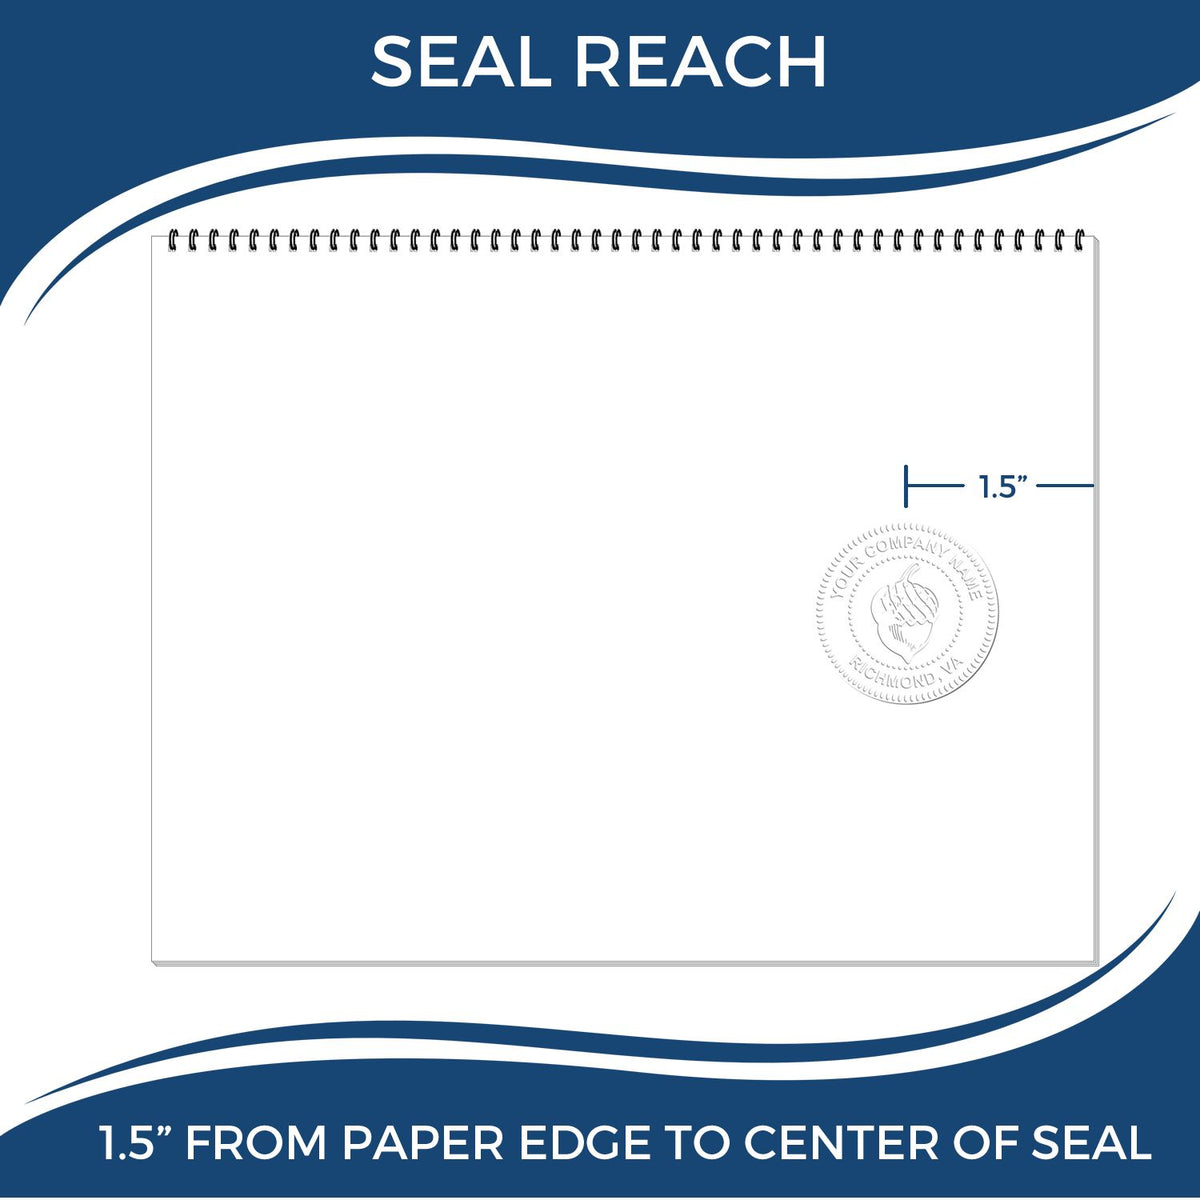 An infographic showing the seal reach which is represented by a ruler and a miniature seal image of the Montana Geologist Desk Seal